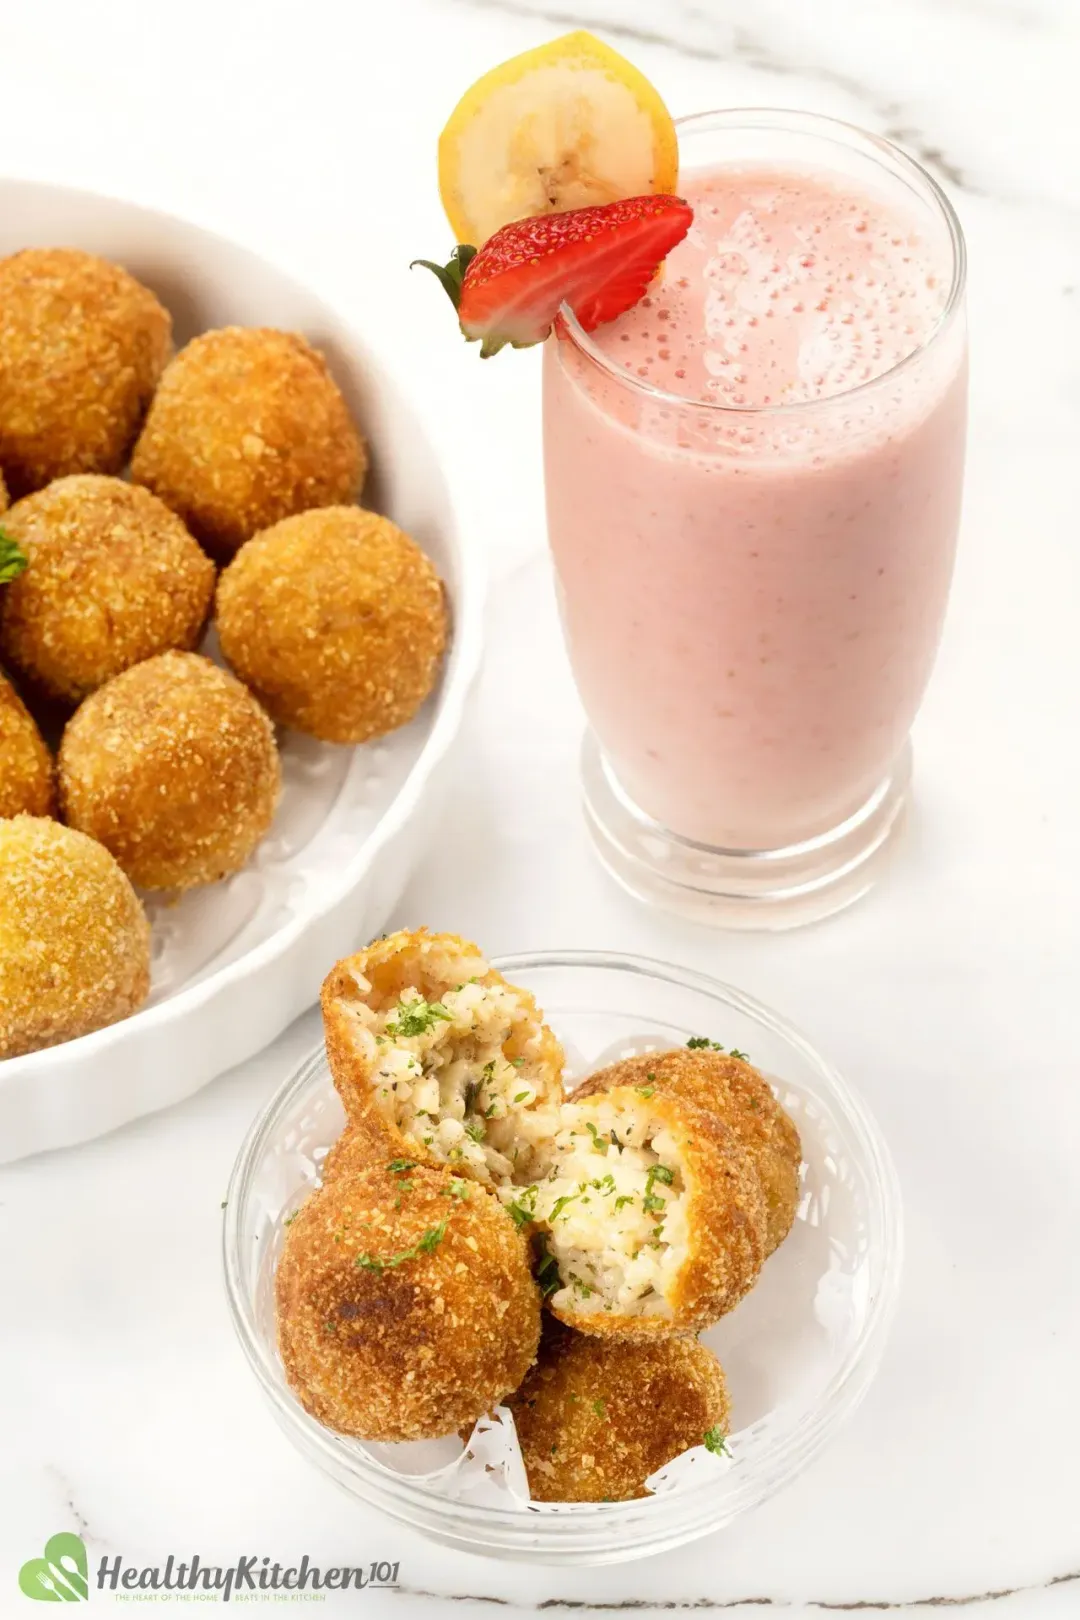 What to Serve with Arancini Balls